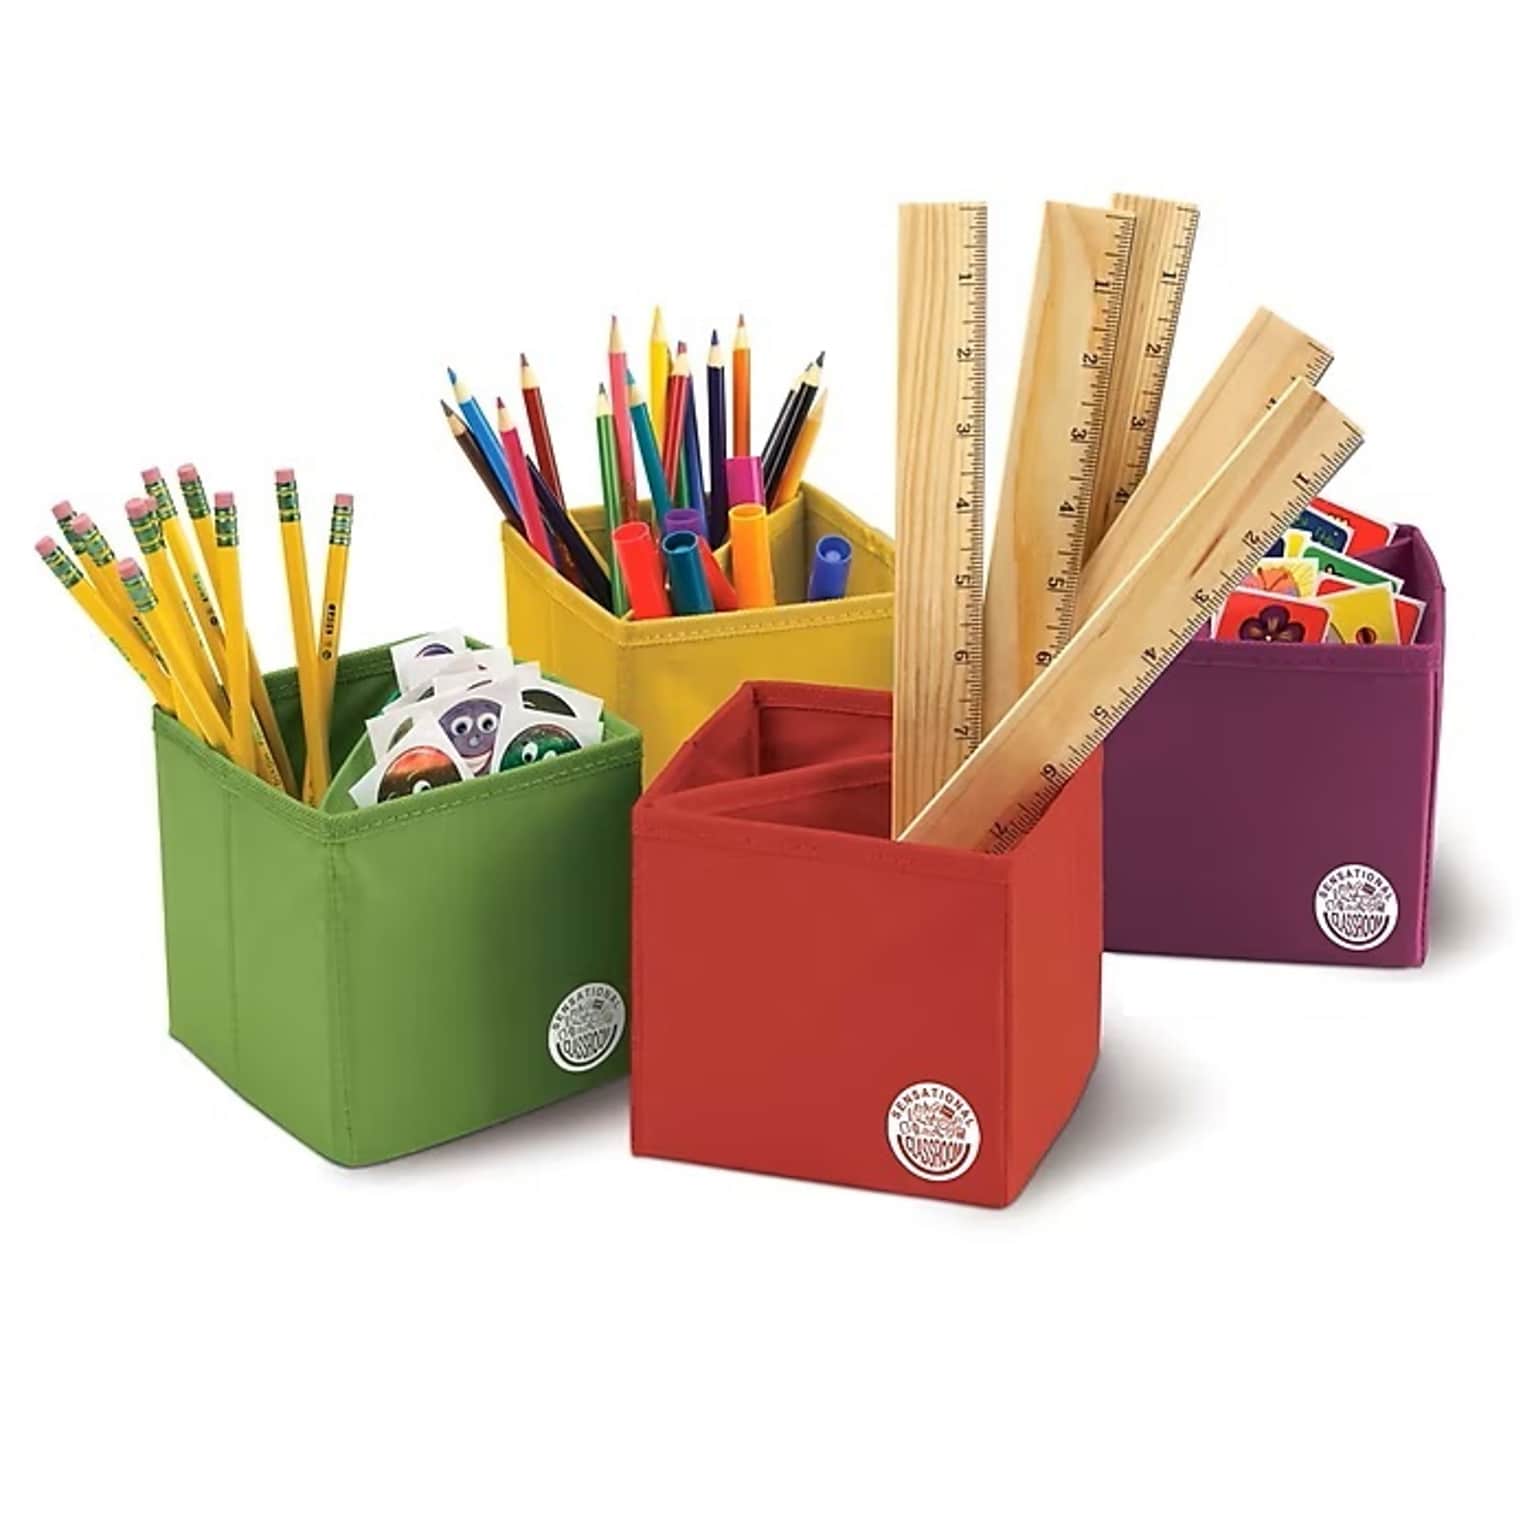 Primary Concepts Sensational Classroom Polyester Accessory Holders, Assorted Colors, 4/Pack, 2 Packs/Bundle (ELP626690-2)